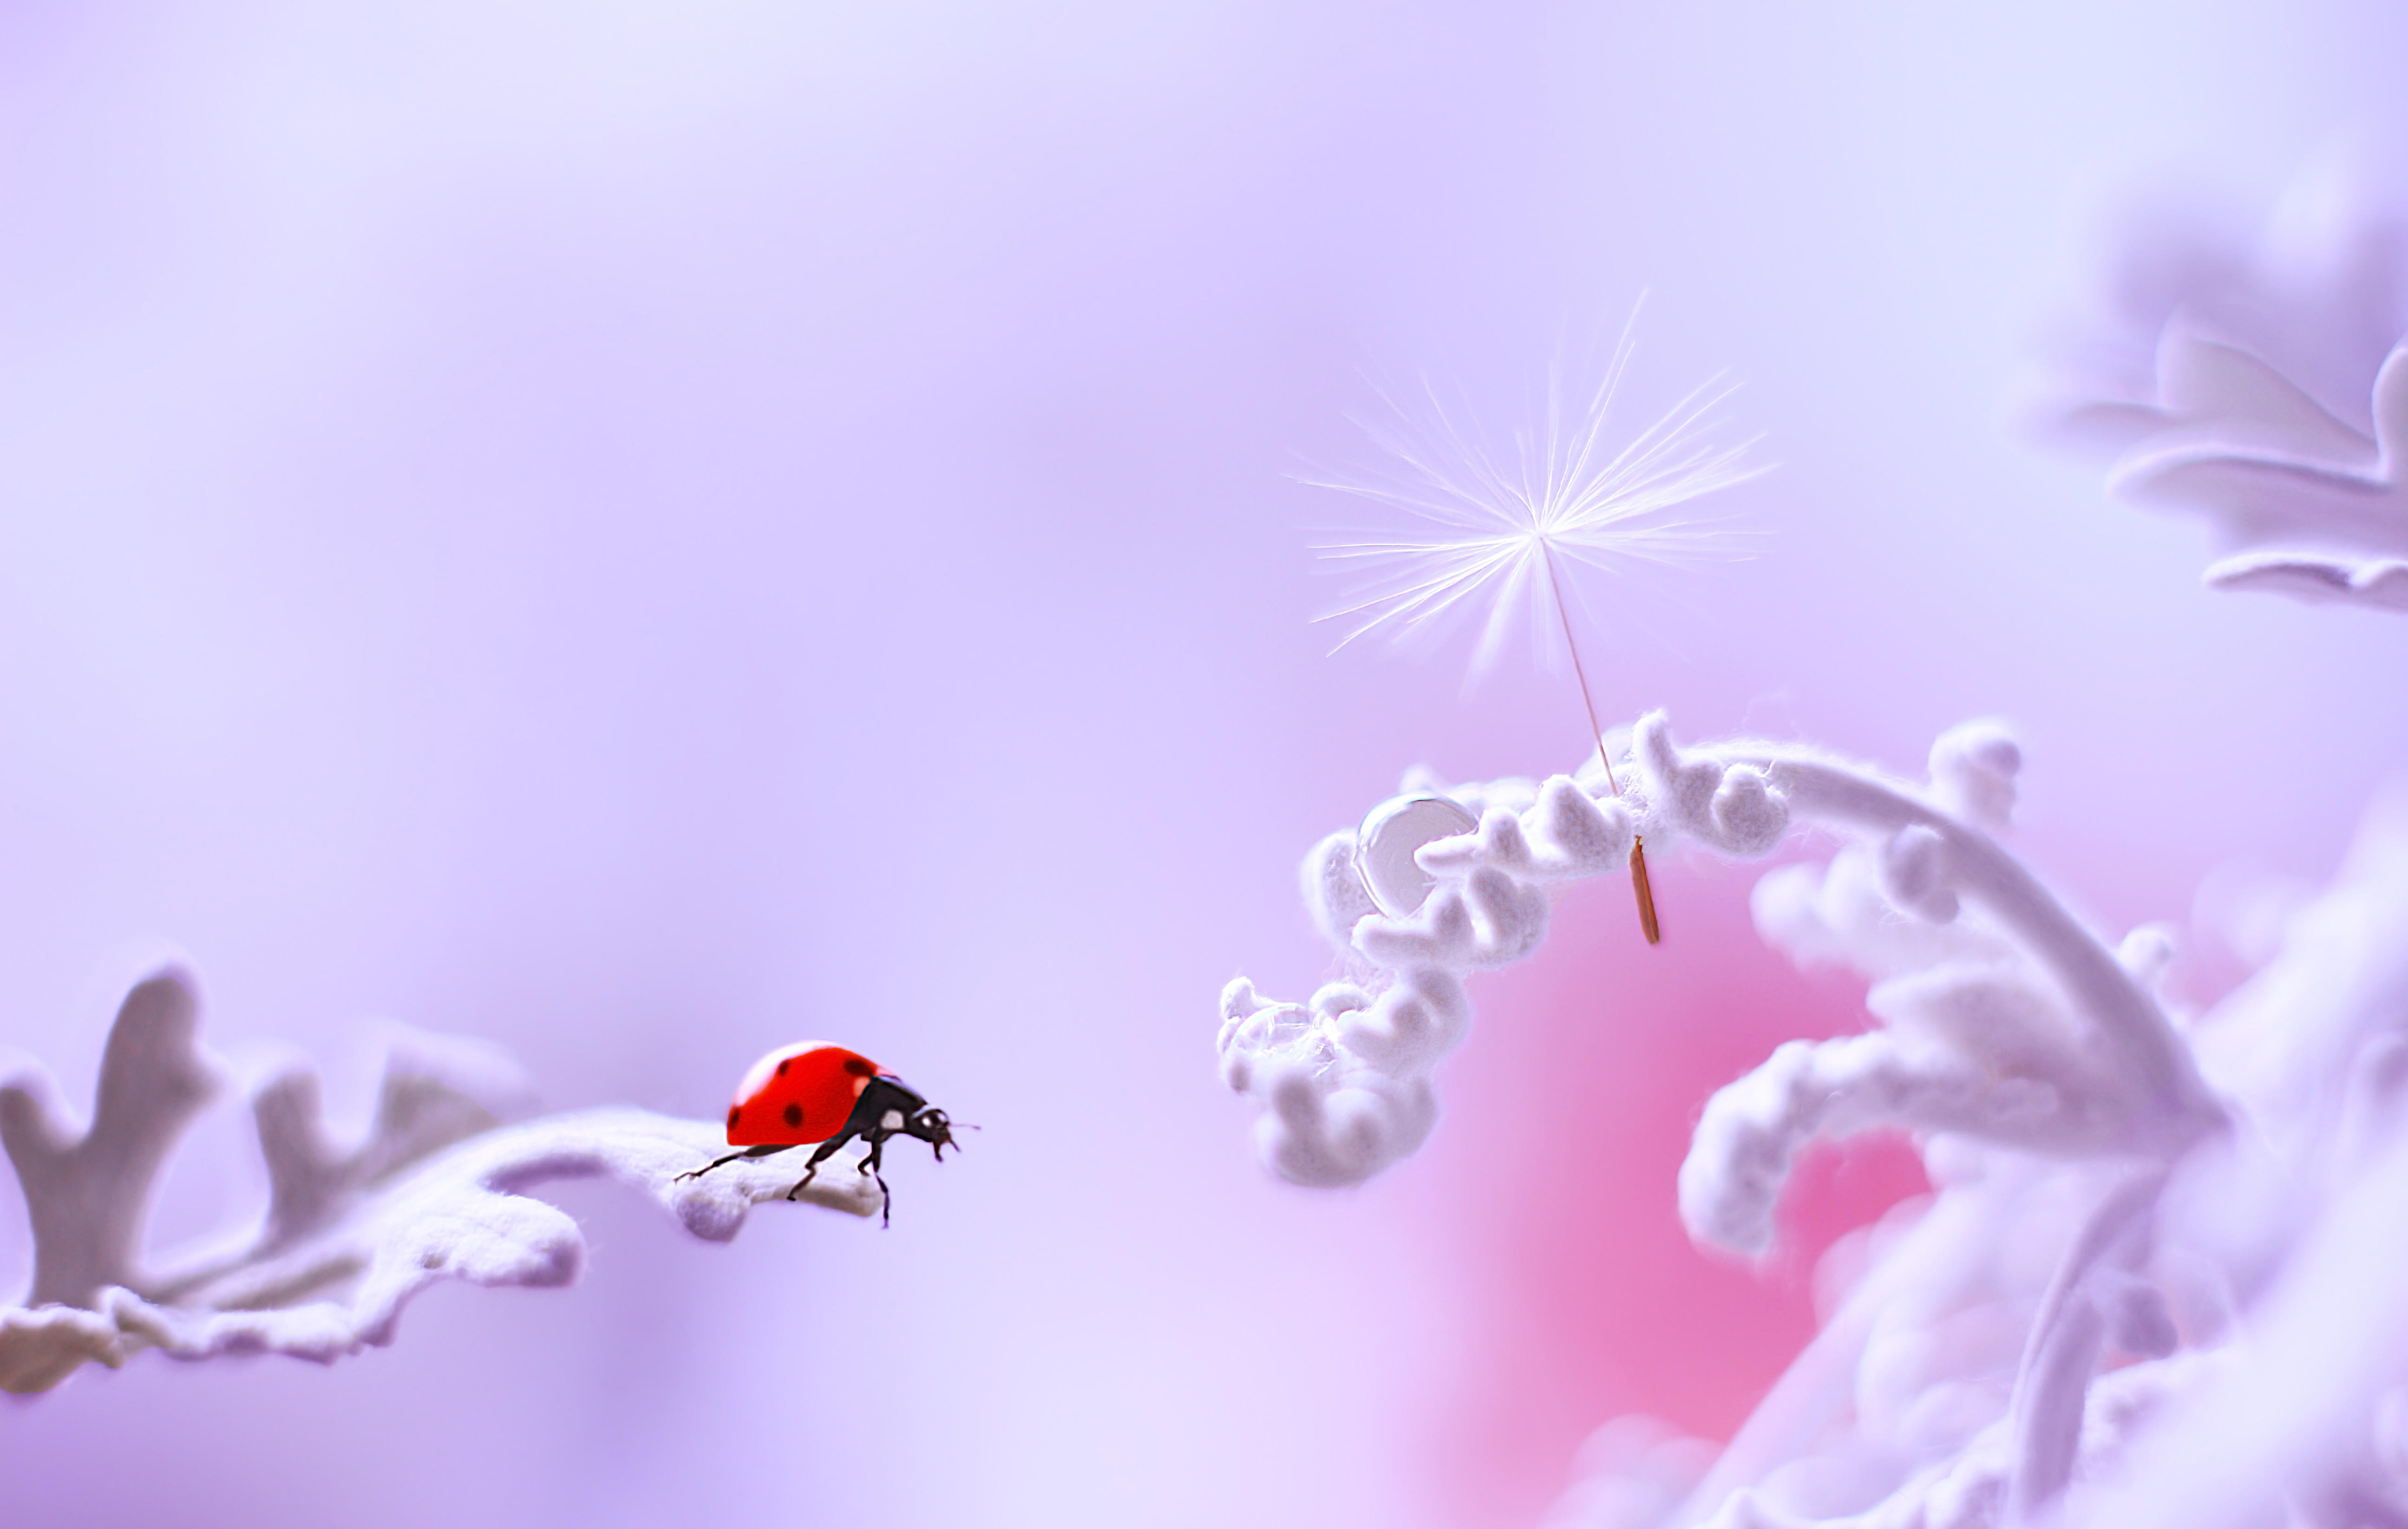 Wallpapers ladybug white flowers insects on the desktop